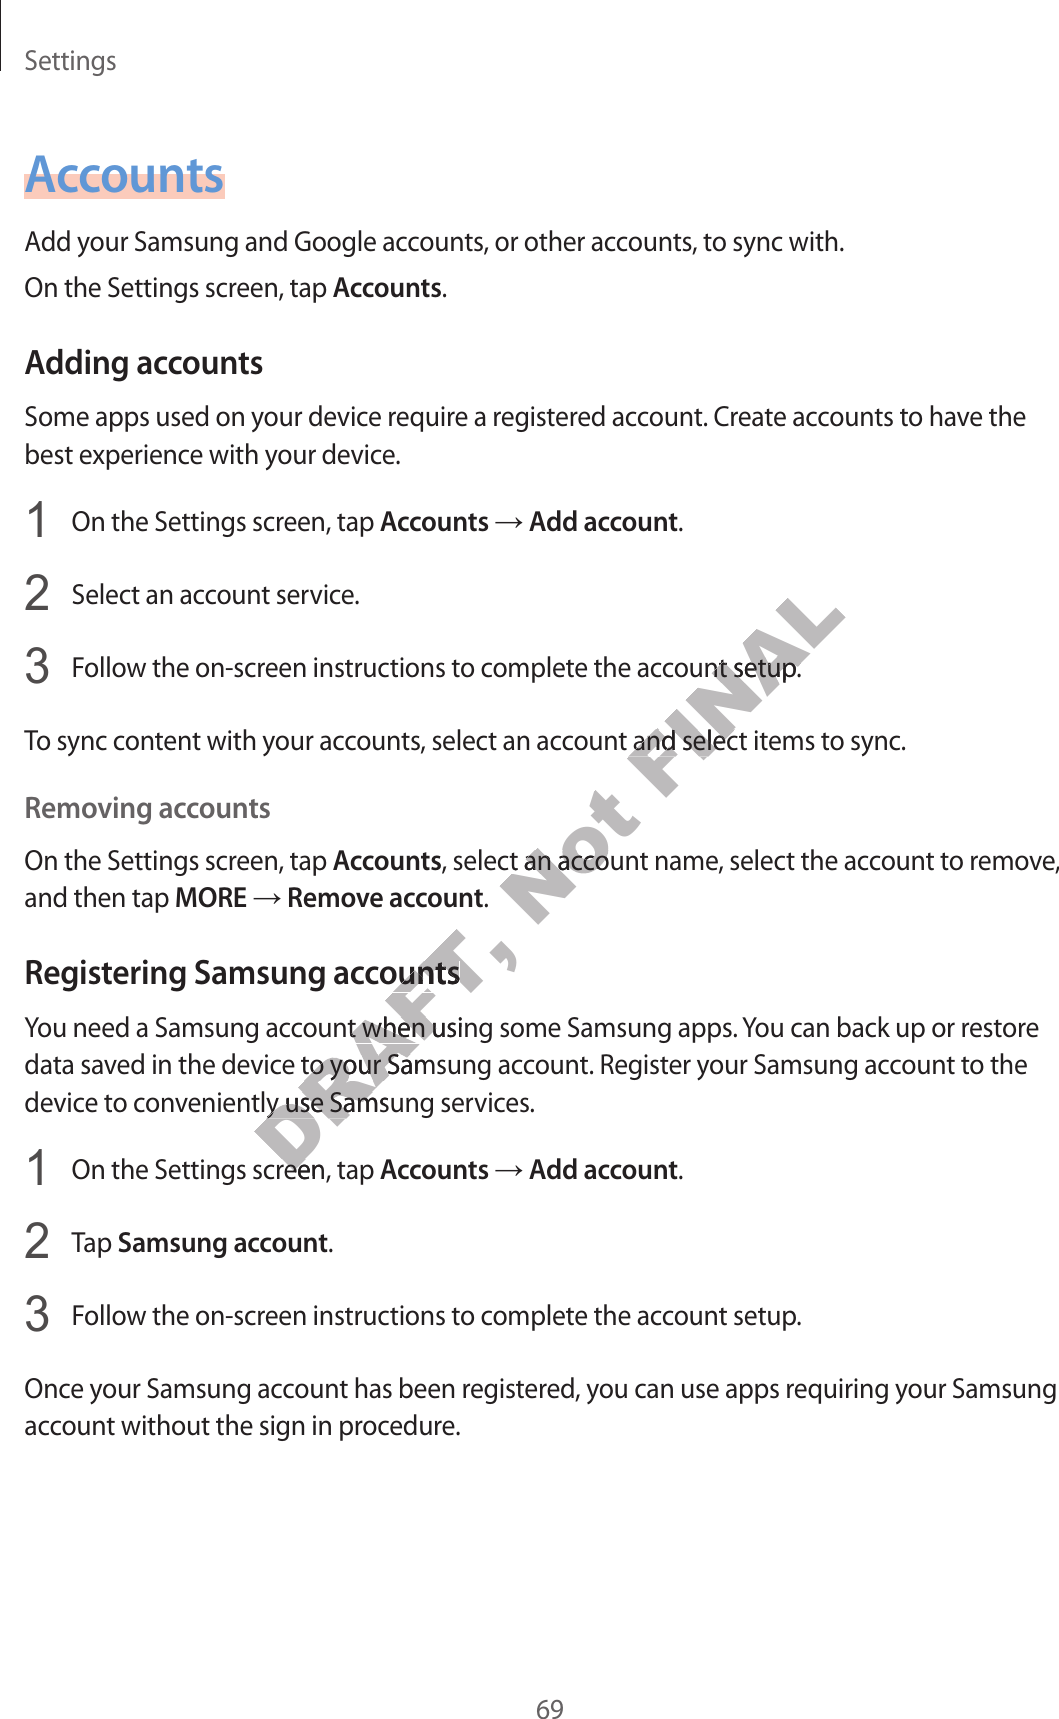 Settings69AccountsAdd y our Samsung and Google accoun ts , or other acc ounts, to sync with.On the Settings screen, tap Accounts.Adding ac c oun tsSome apps used on your device r equir e a r egist er ed ac coun t. Cr ea te ac coun ts to ha v e the best experience with your devic e .1  On the Settings screen, tap Accounts → Add ac c ount.2  Select an accoun t service.3  Follow the on-screen instructions to complete the ac coun t setup.To sync conten t with y our acc ounts , select an accoun t and select items to sync .Removing acc oun tsOn the Settings screen, tap Accounts, select an account name, select the accoun t to r emo v e , and then tap MORE → Remov e acc oun t.Registering Samsung acc ountsYou need a Samsung account when using some Samsung apps. You can back up or restore data sav ed in the devic e to y our Samsung acc ount . Regist er y our Samsung accoun t to the device to c on v eniently use Samsung services.1  On the Settings screen, tap Accounts → Add ac c ount.2  Tap Samsung account.3  Follow the on-screen instructions to complete the ac coun t setup.Once your Samsung ac coun t has been r egist er ed , y ou can use apps r equiring your Samsung account without the sig n in pr oc edur e .DRAFT, Registering Samsung acc ountsDRAFT, Registering Samsung acc ountsYou need a Samsung account when using some Samsung apps. You can back up or restore DRAFT, You need a Samsung account when using some Samsung apps. You can back up or restore data sav ed in the devic e to y our Samsung acc ount . Regist er y our Samsung accoun t to the DRAFT, data sav ed in the devic e to y our Samsung acc ount . Regist er y our Samsung accoun t to the device to c on v eniently use Samsung services.DRAFT, device to c on v eniently use Samsung services.On the Settings screen, tap DRAFT, On the Settings screen, tap Not , select an account name, select the accoun t to r emo v e , Not , select an account name, select the accoun t to r emo v e , FINALFollow the on-screen instructions to complete the ac coun t setup.FINALFollow the on-screen instructions to complete the ac coun t setup.To sync conten t with y our acc ounts , select an accoun t and select items to sync .FINALTo sync conten t with y our acc ounts , select an accoun t and select items to sync .